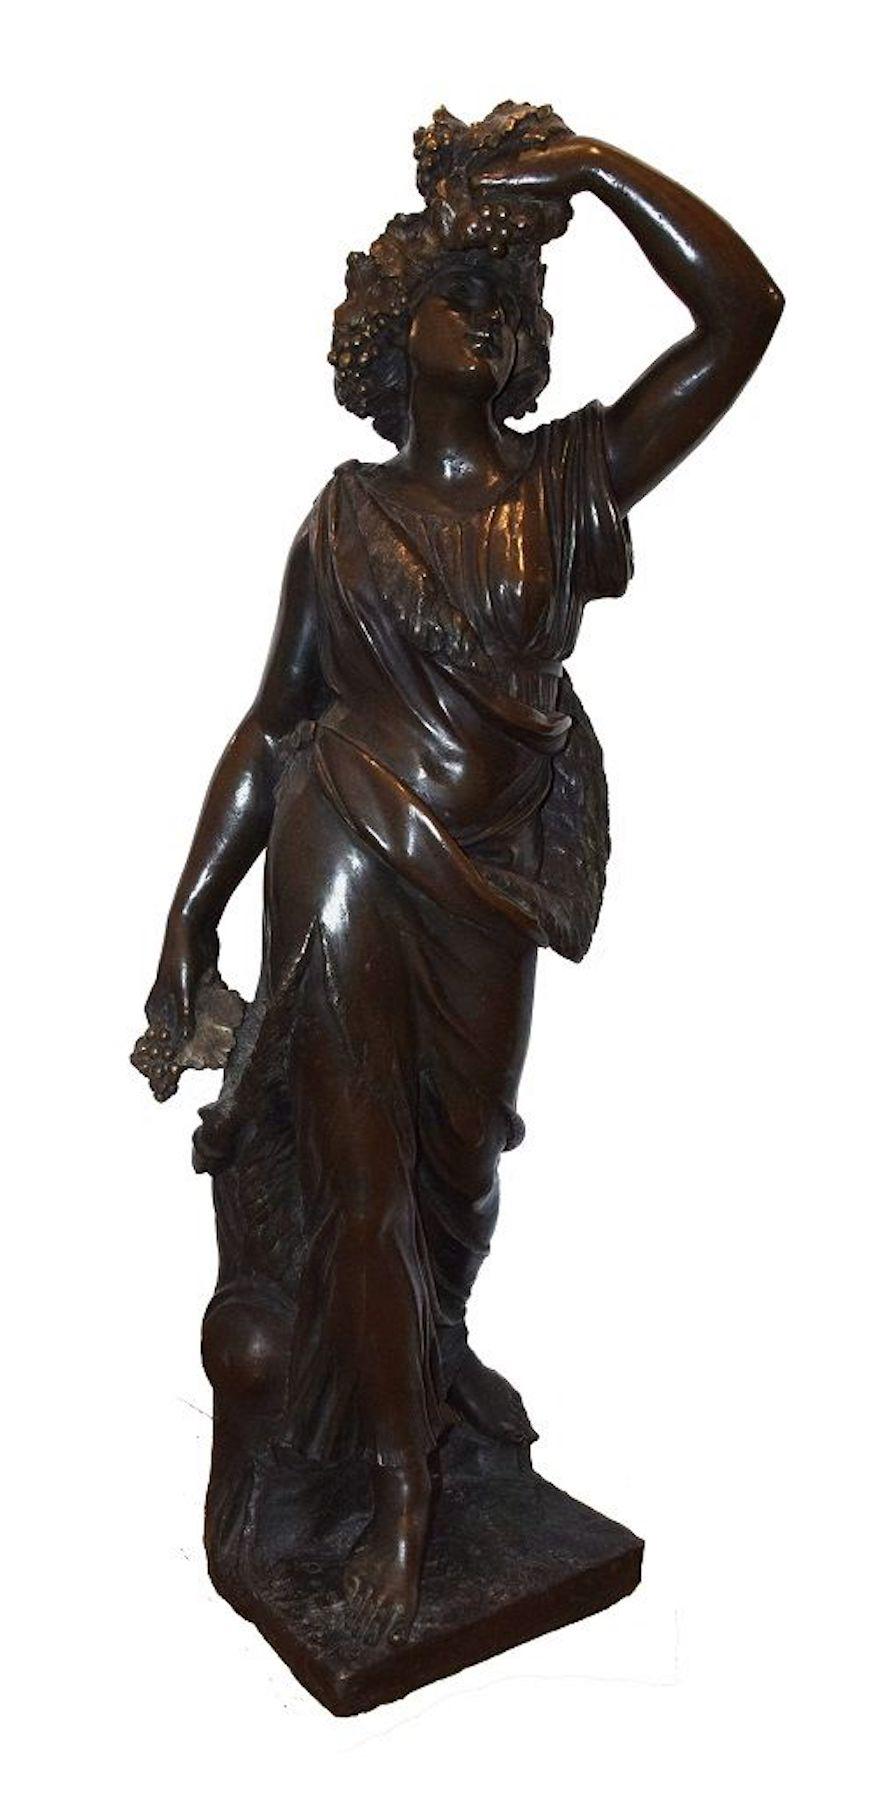 Follower of Bacchus is an original bronze sculpture realized by an Italian Sculptor in the end of the XIX century.

Bronze casting. Made in Italy.

Measures: H 100 cm.

Excellent conditions.

Beautiful and precious work of art realized in